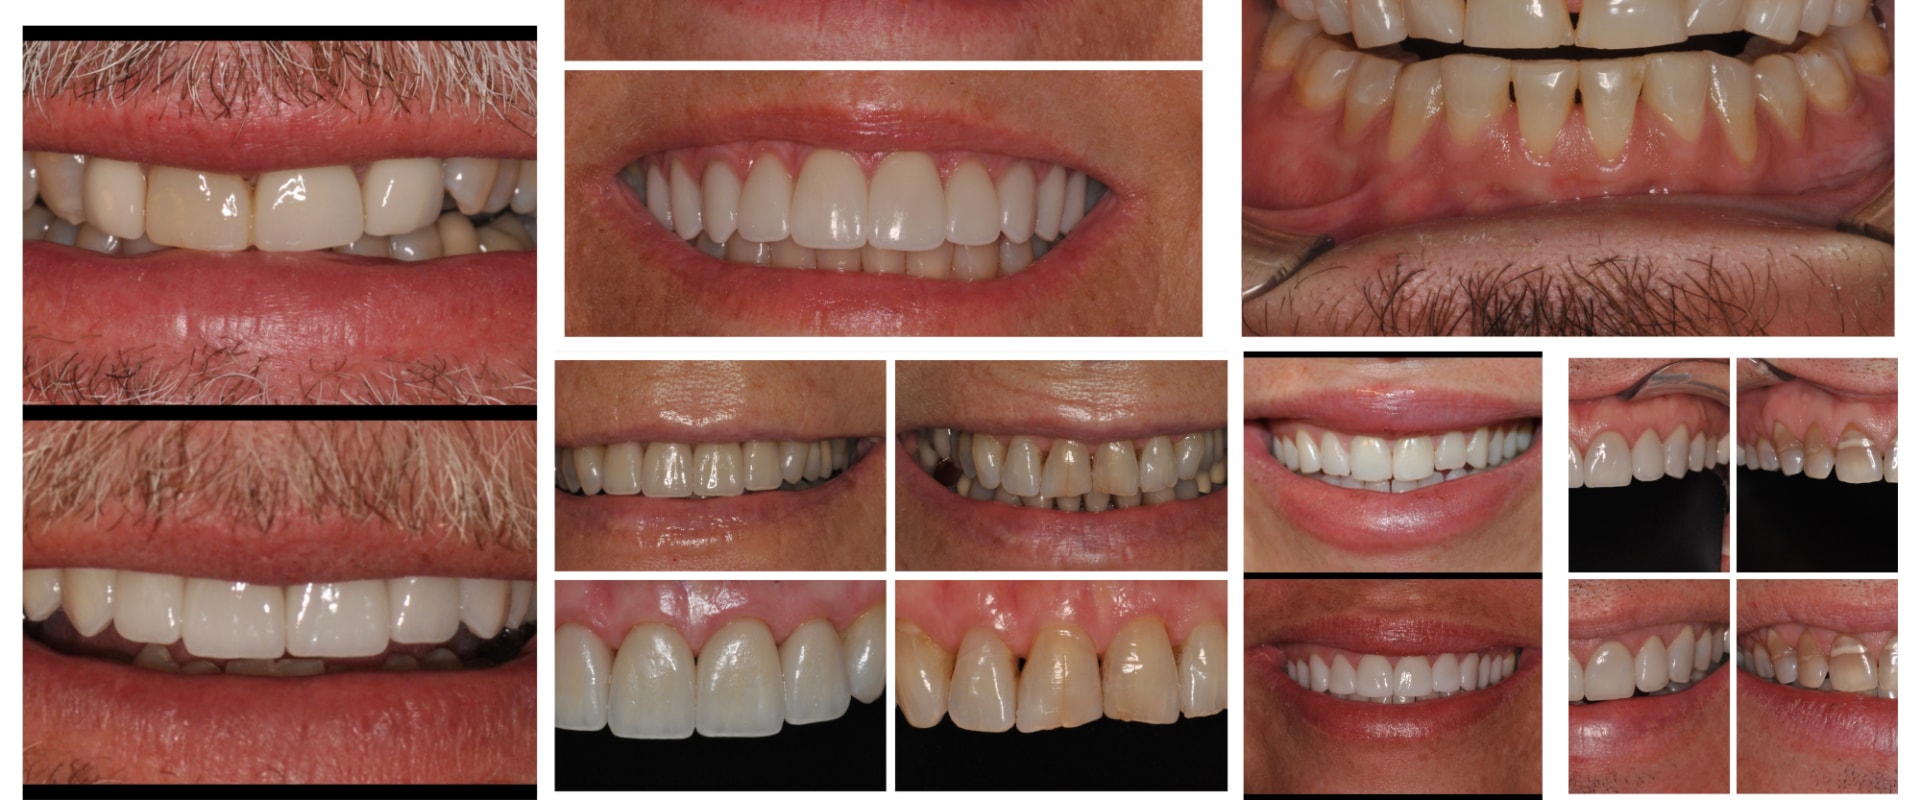 Complete Transformation of Smile Appearance: How a Smile Makeover Can Benefit You